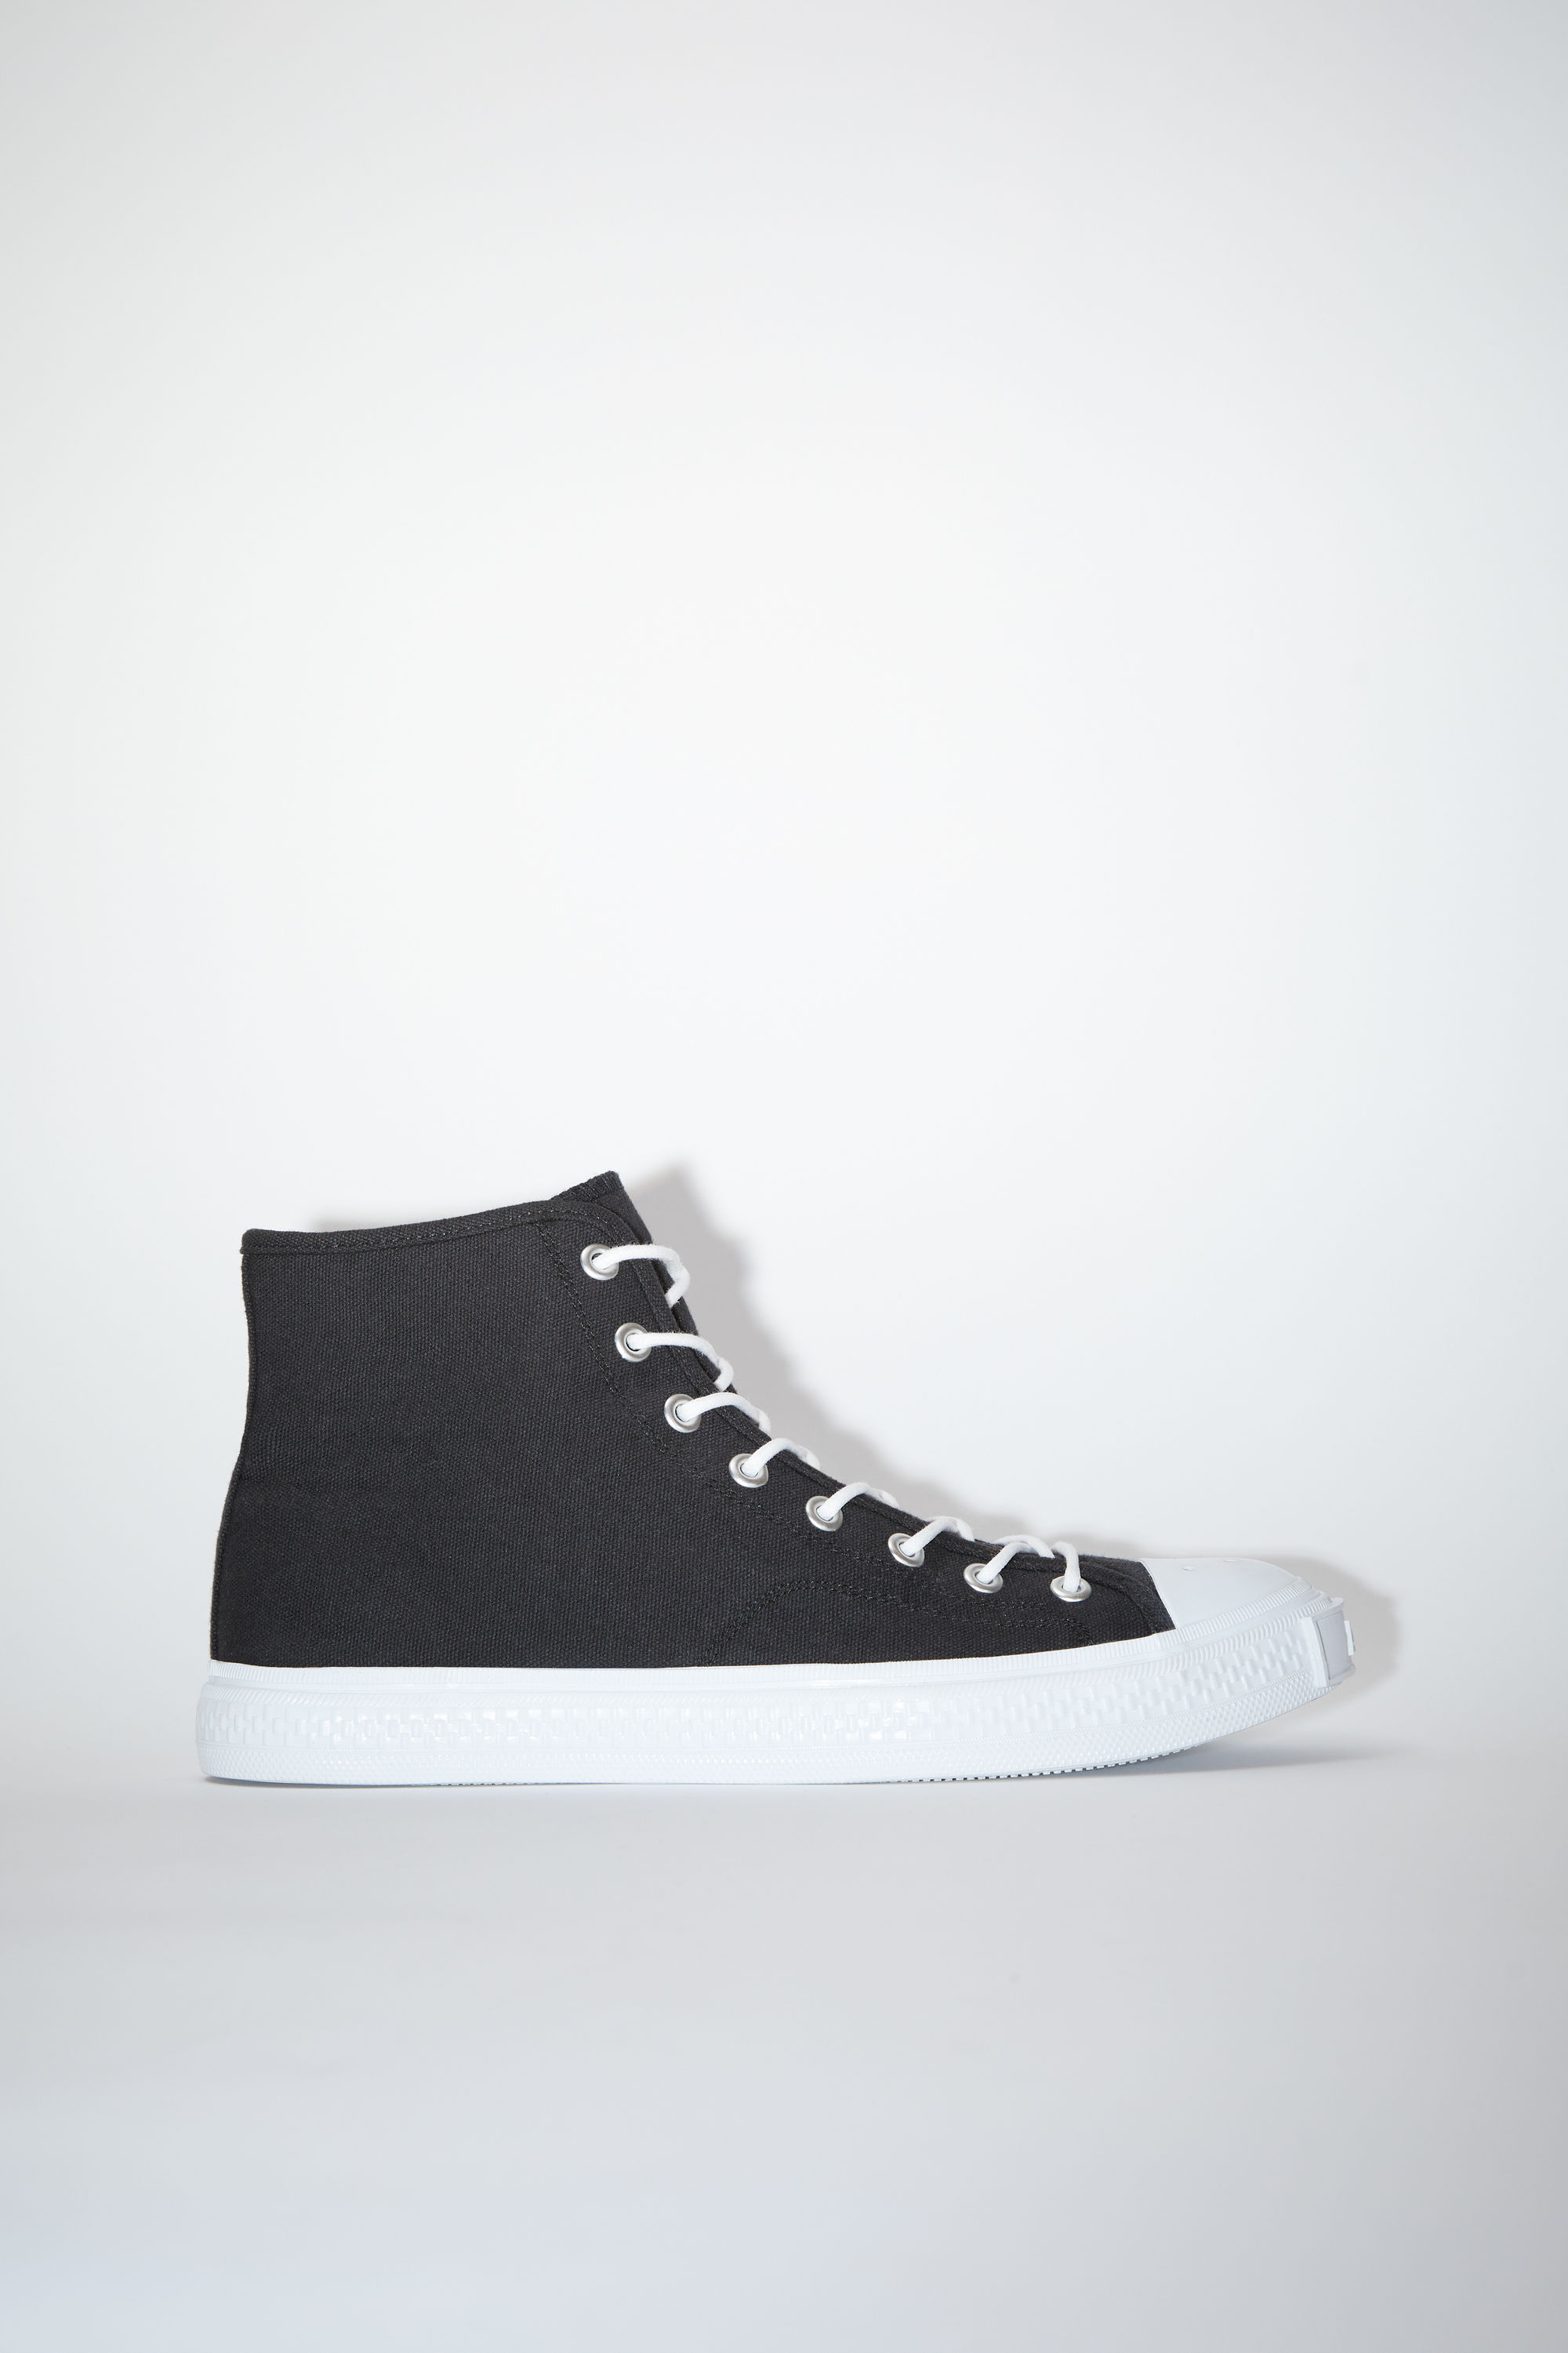 ACNE STUDIOS ACNE STUDIOS BALLOW HIGH TAG M BLACK/OFF WHITE HIGH TOP SNEAKERS